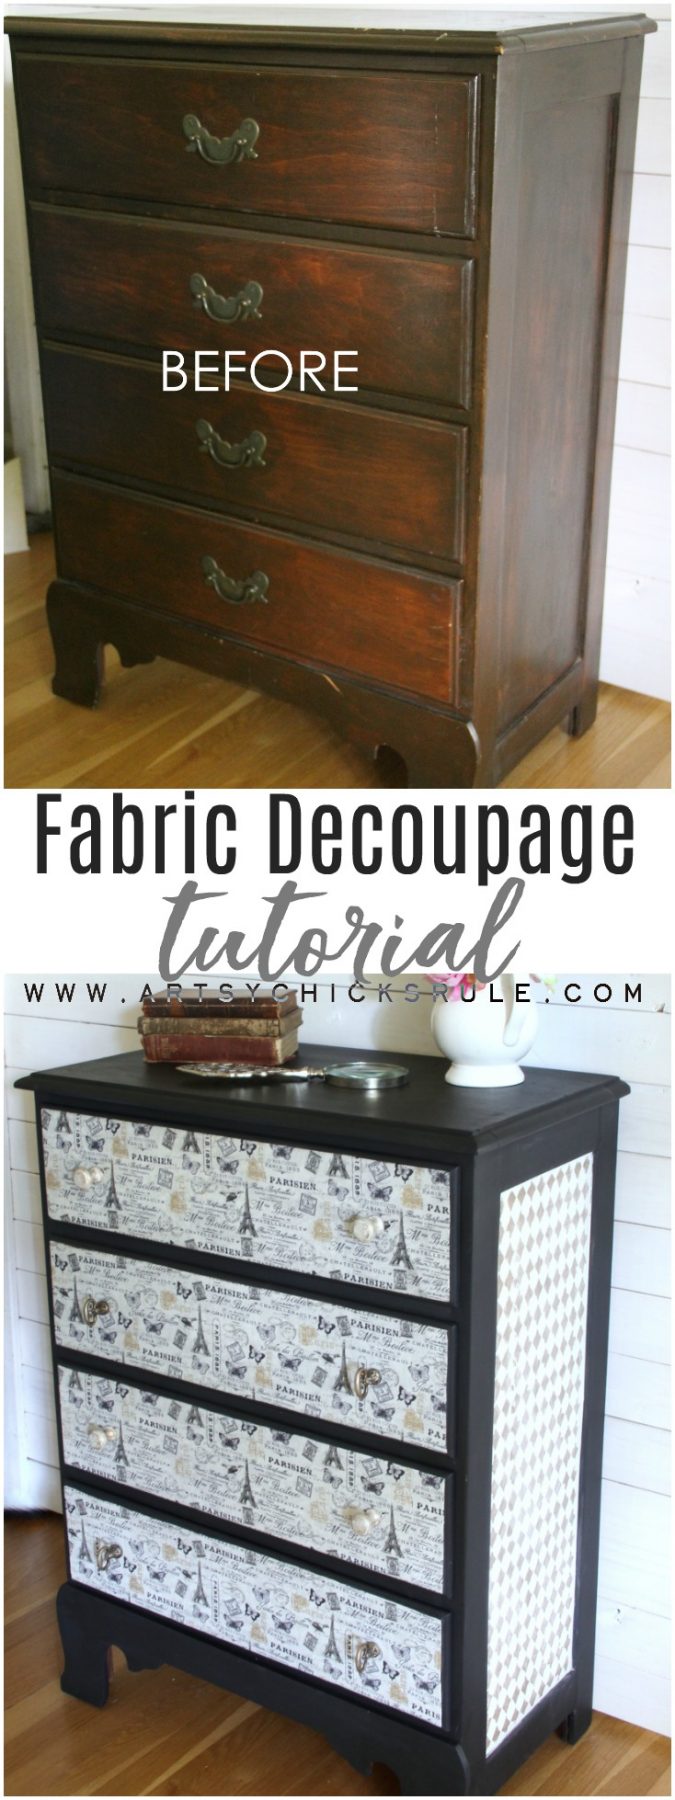 French Fabric Decoupage Tutorial (full how-to!) - Artsy Chicks Rule®